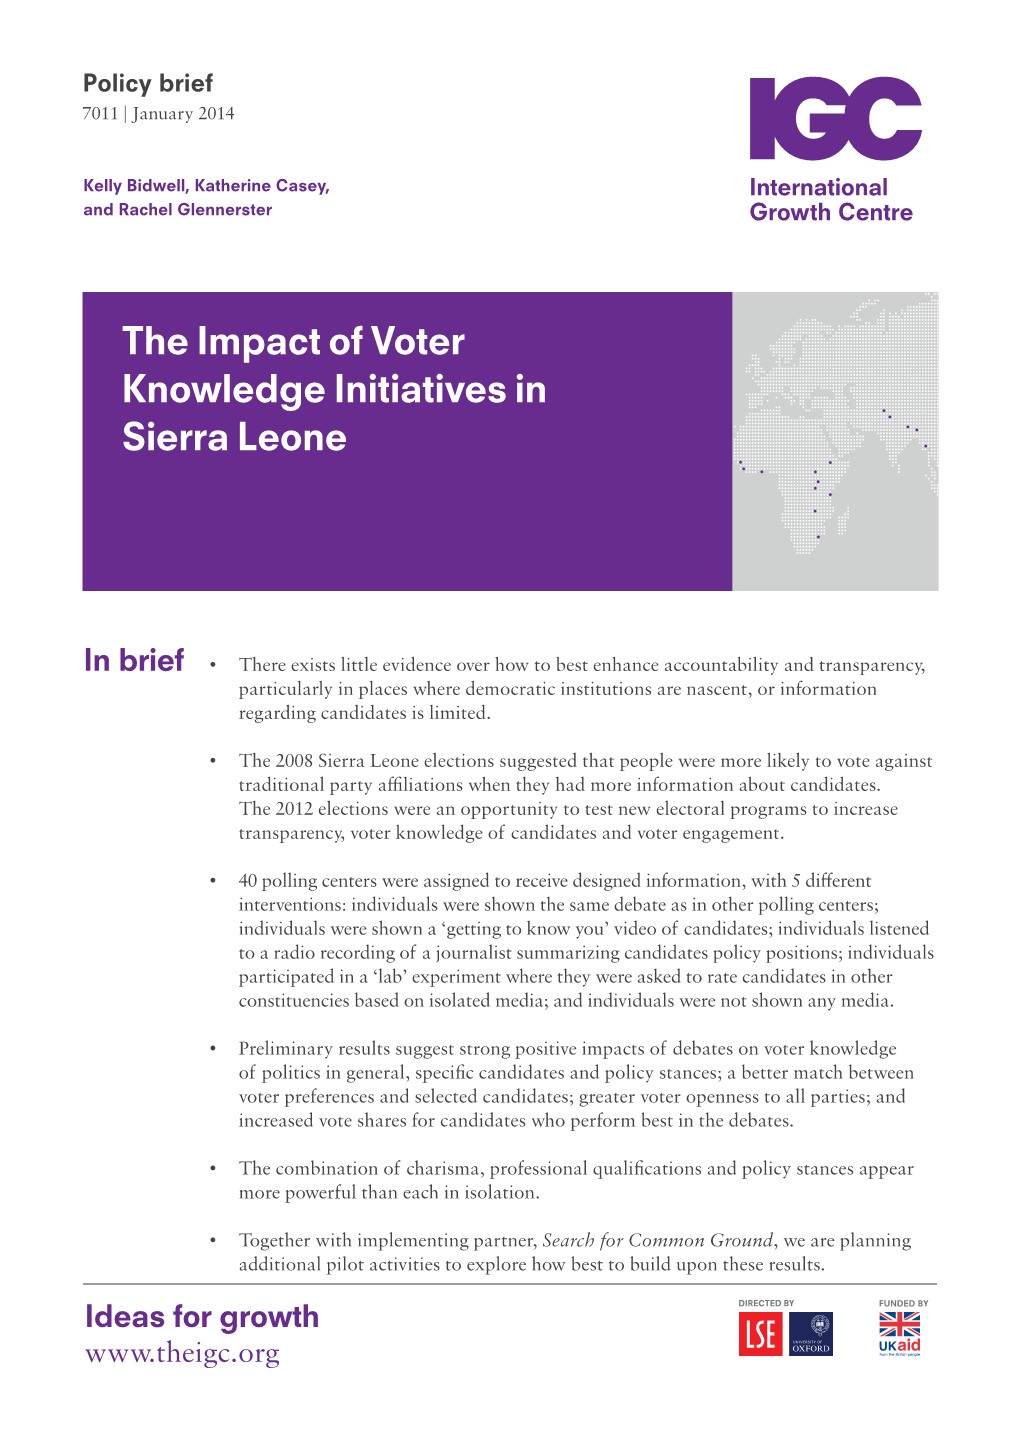 The Impact of Voter Knowledge Initiatives in Sierra Leone